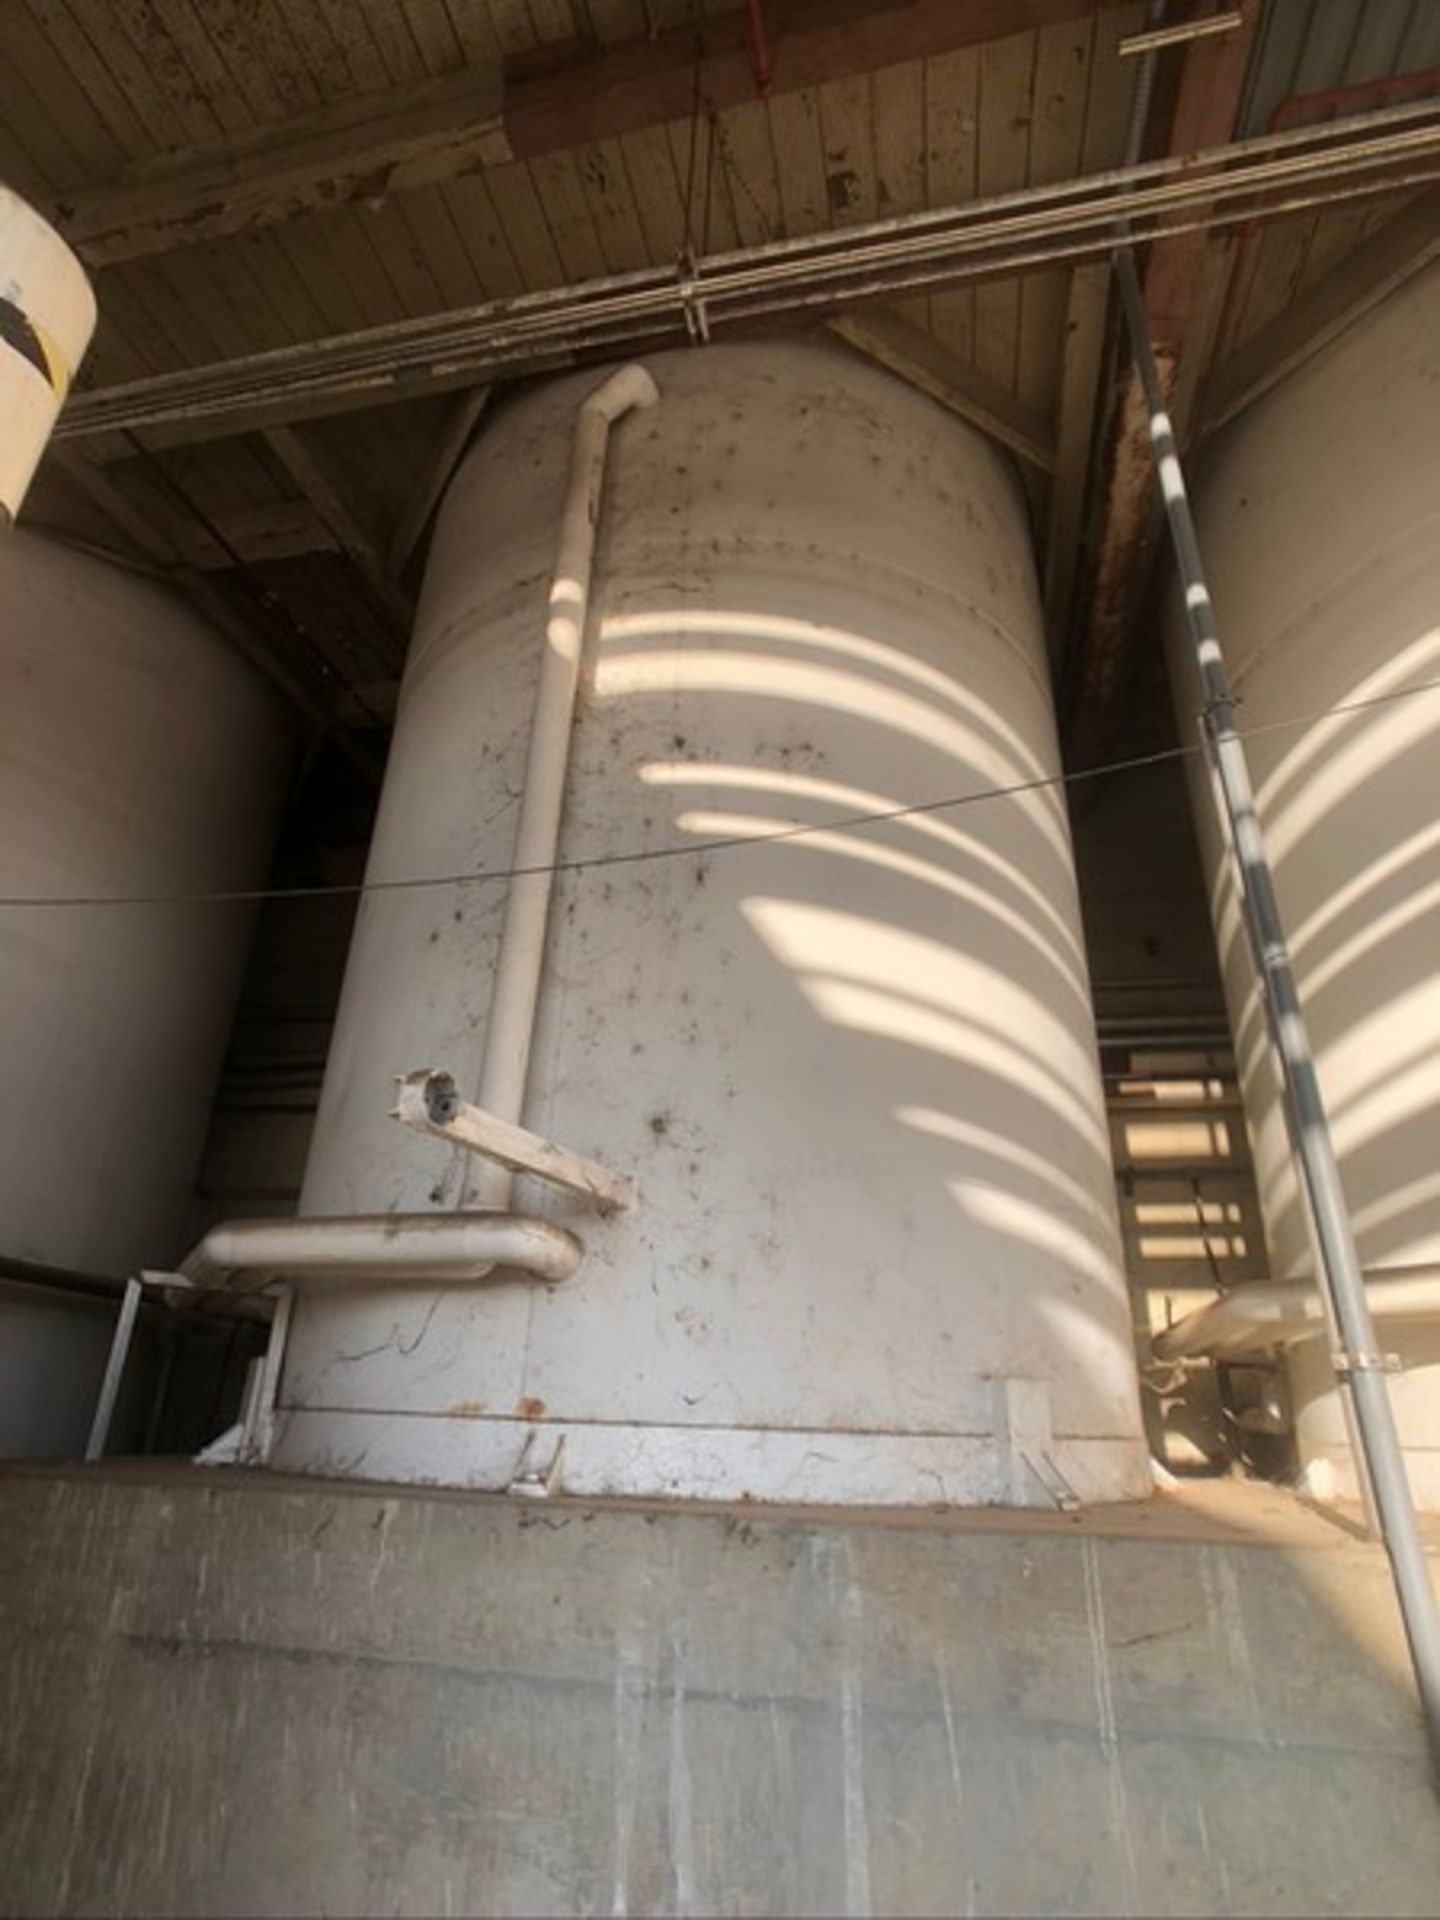 CHERRY BURRELL APPX. 15,000 GALLON JACKETED SILO, EQUIPPED WITH VERTICAL AGITATION, WCB INLET VALVE, - Image 9 of 25